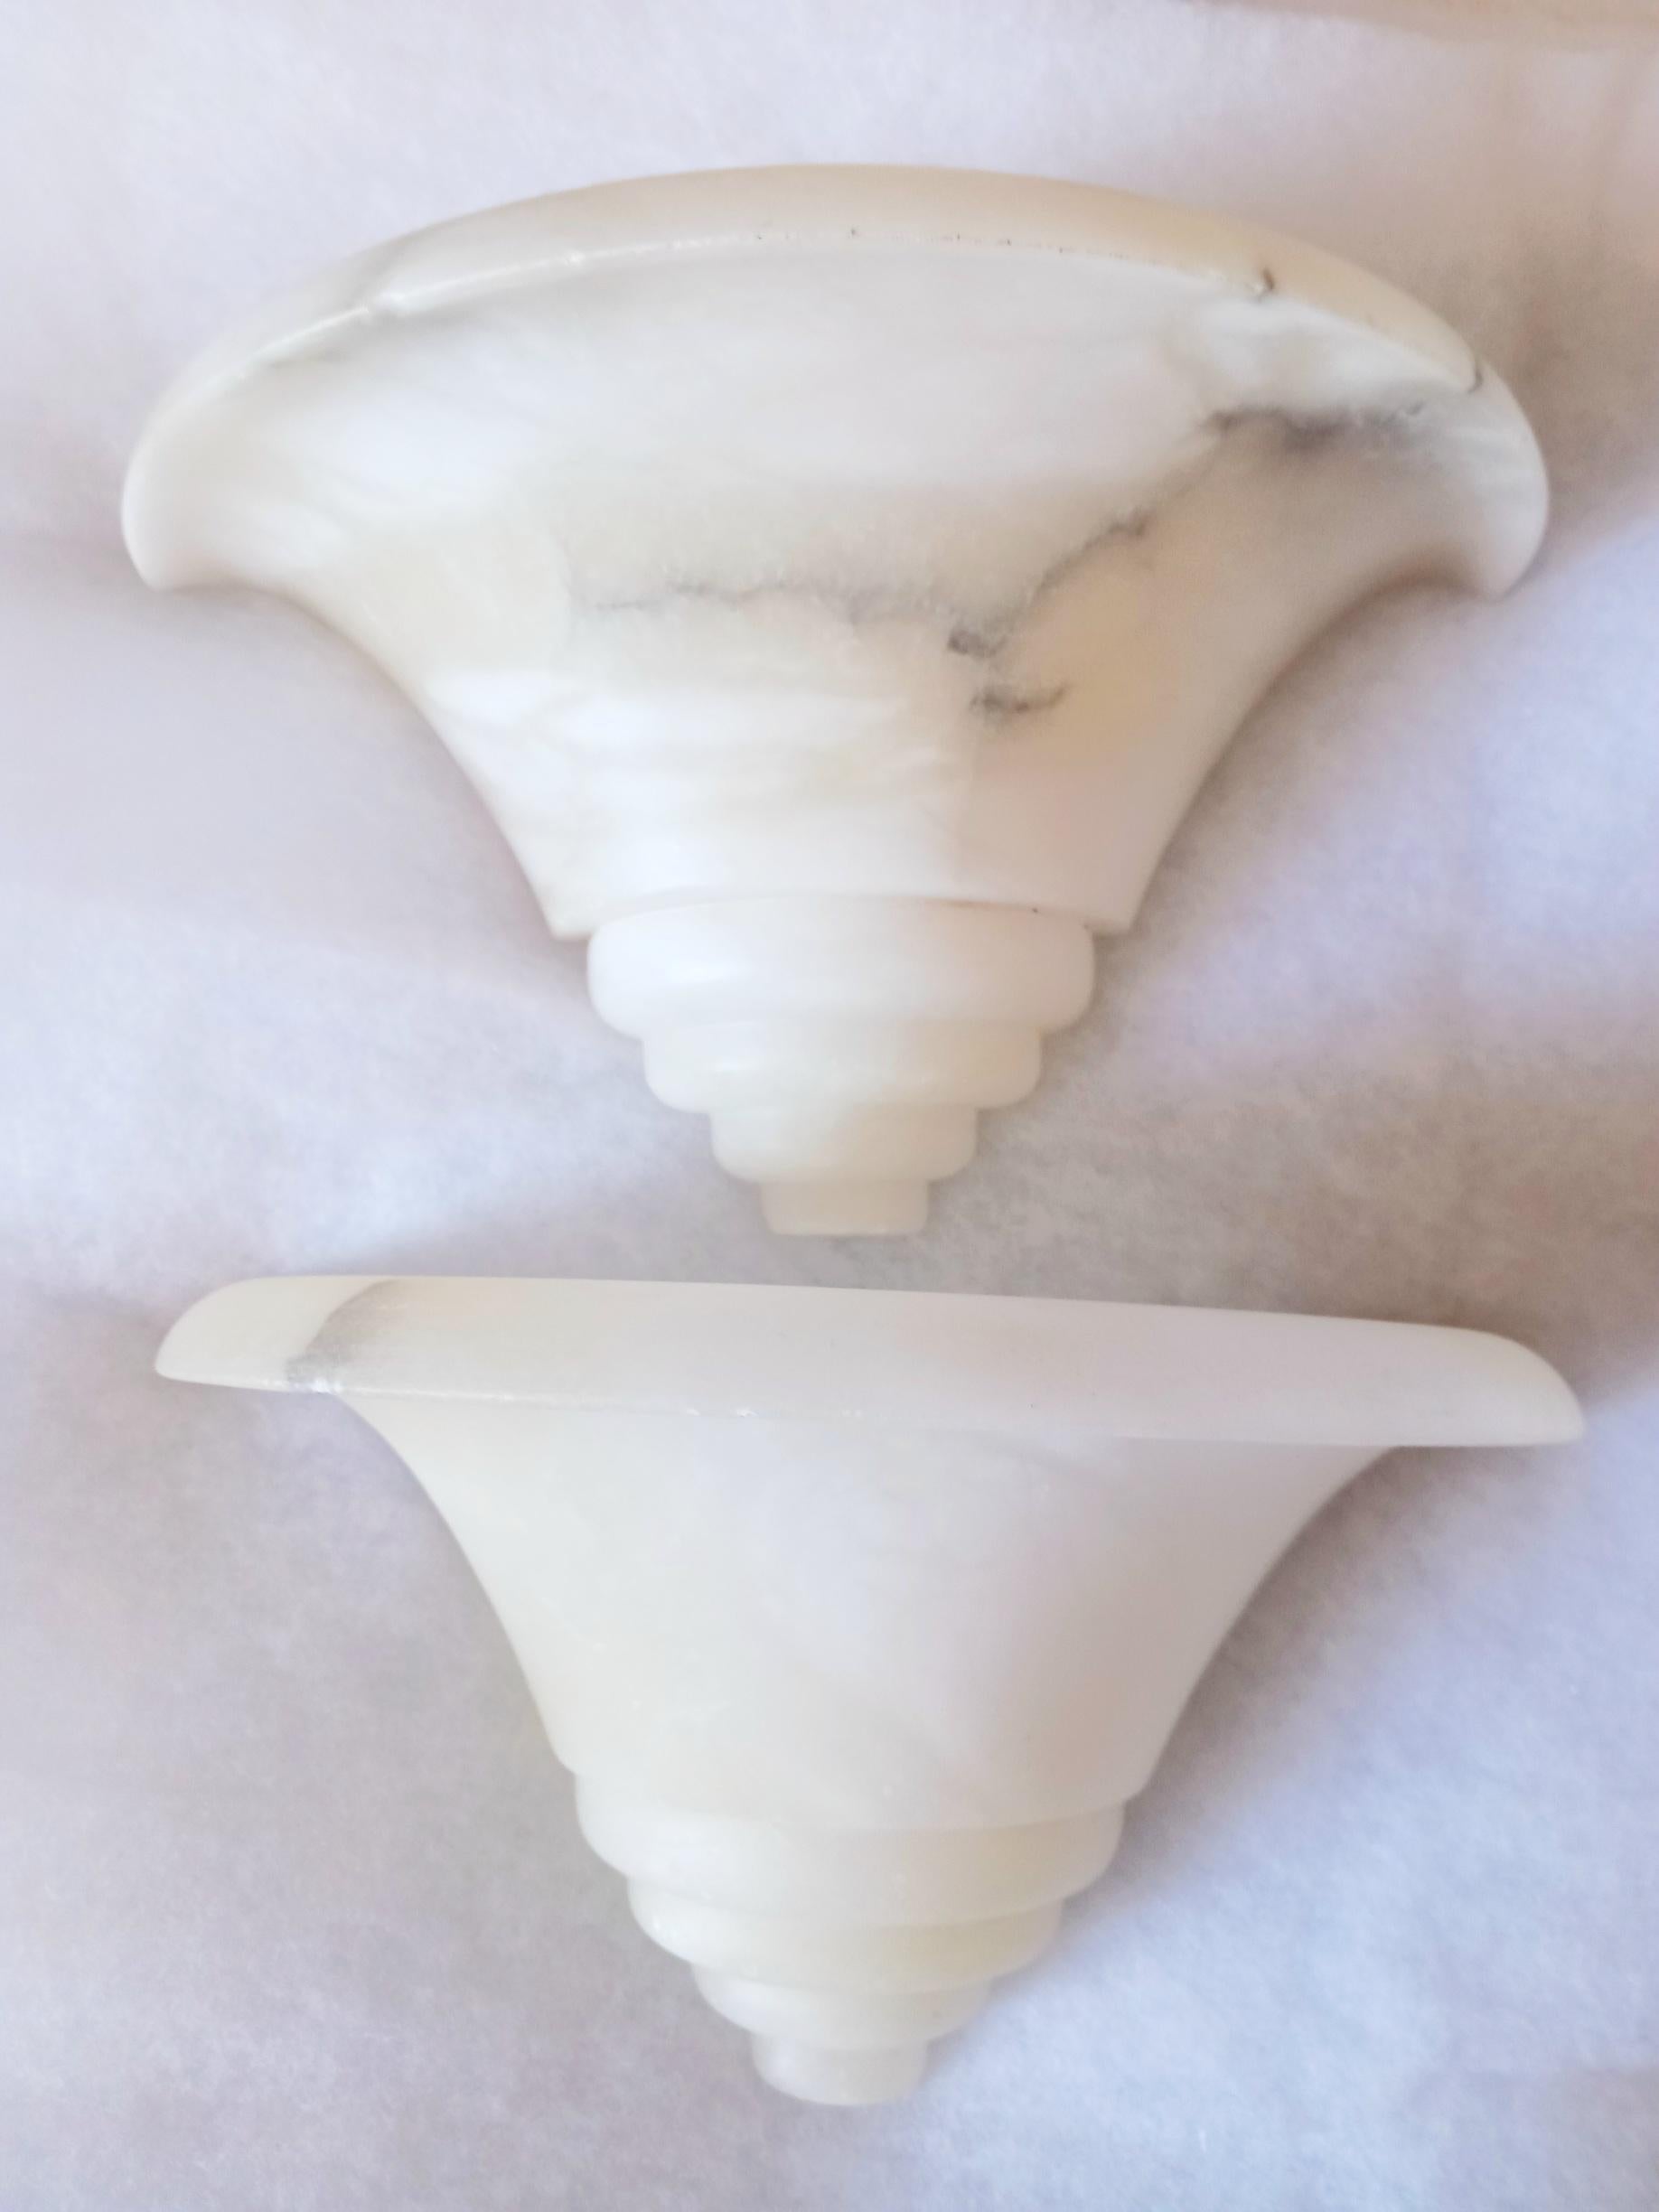 White /Greynatural alabaster sconces
It is a very special piece, the white is very pure and one of them has a nice gray streak so characteristic, looking very pretty when illuminated
their shapes are rounded,
It is in excellent condition, like new.